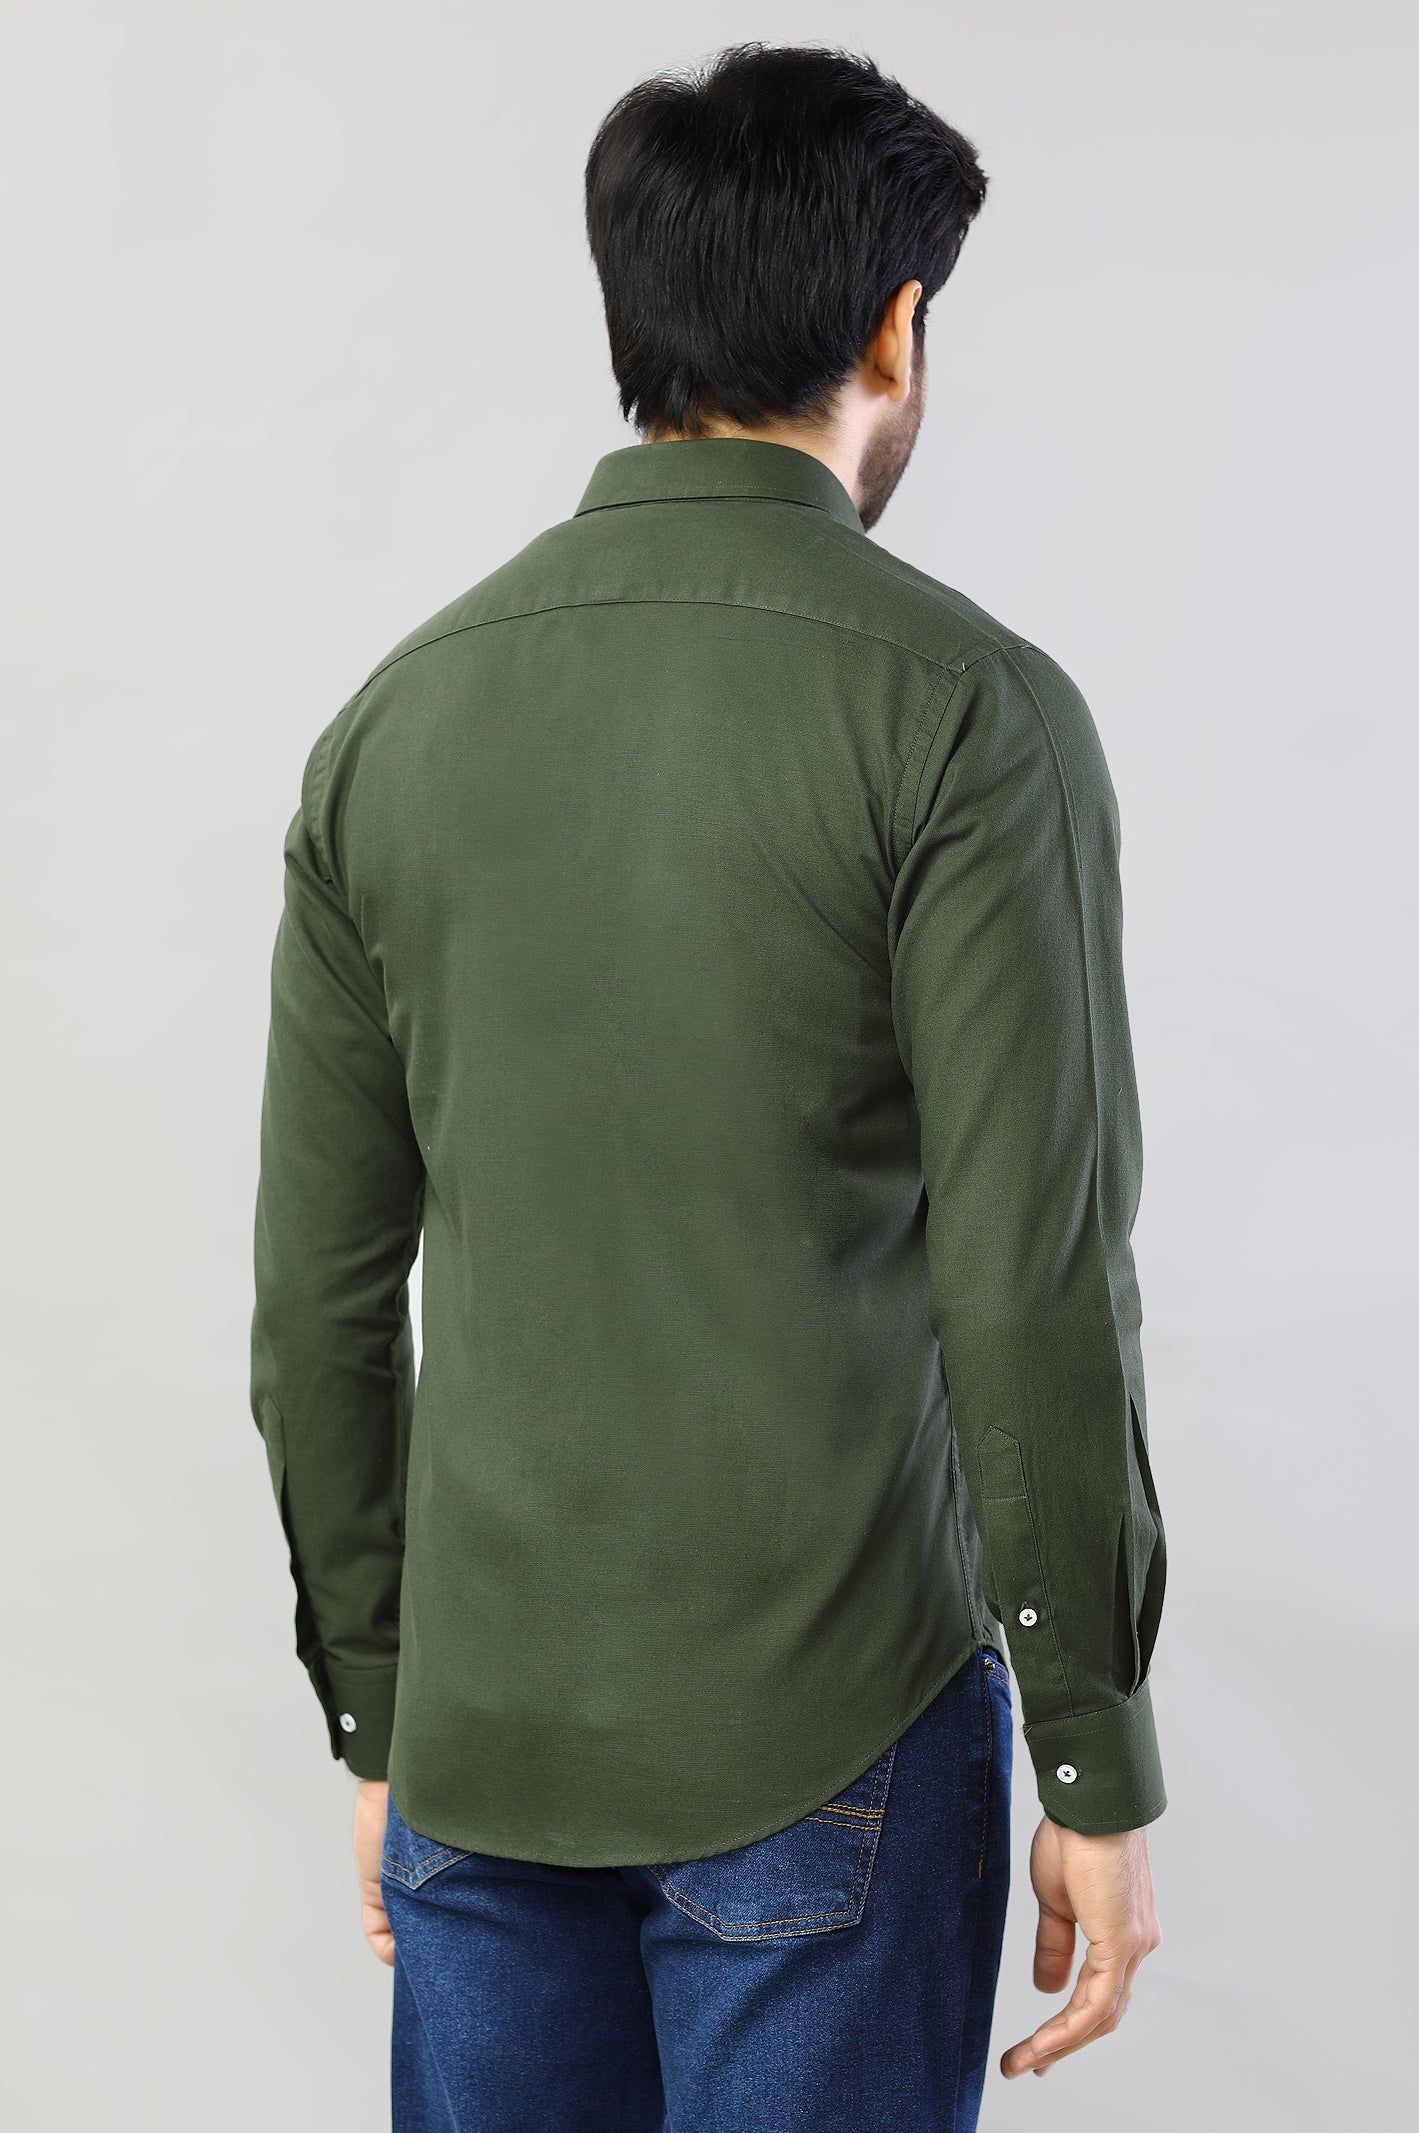 Green Plain Casual Shirt for Men - Diners